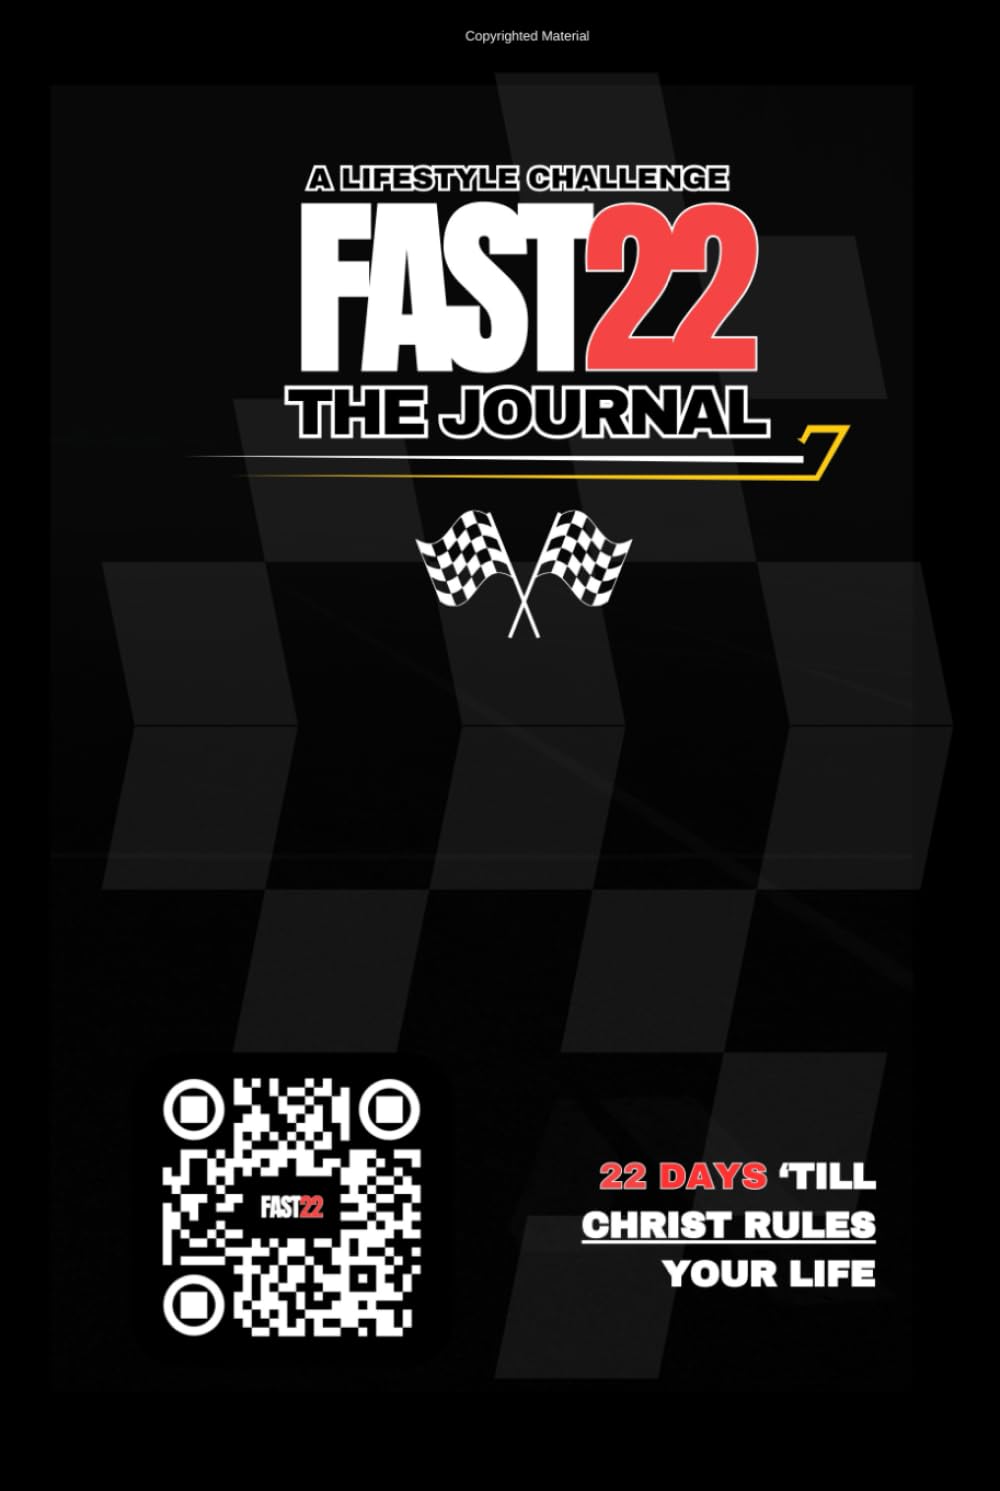 THE FAST22 DAY LIFESTYLE CHALLENGE & DEVOTIONAL